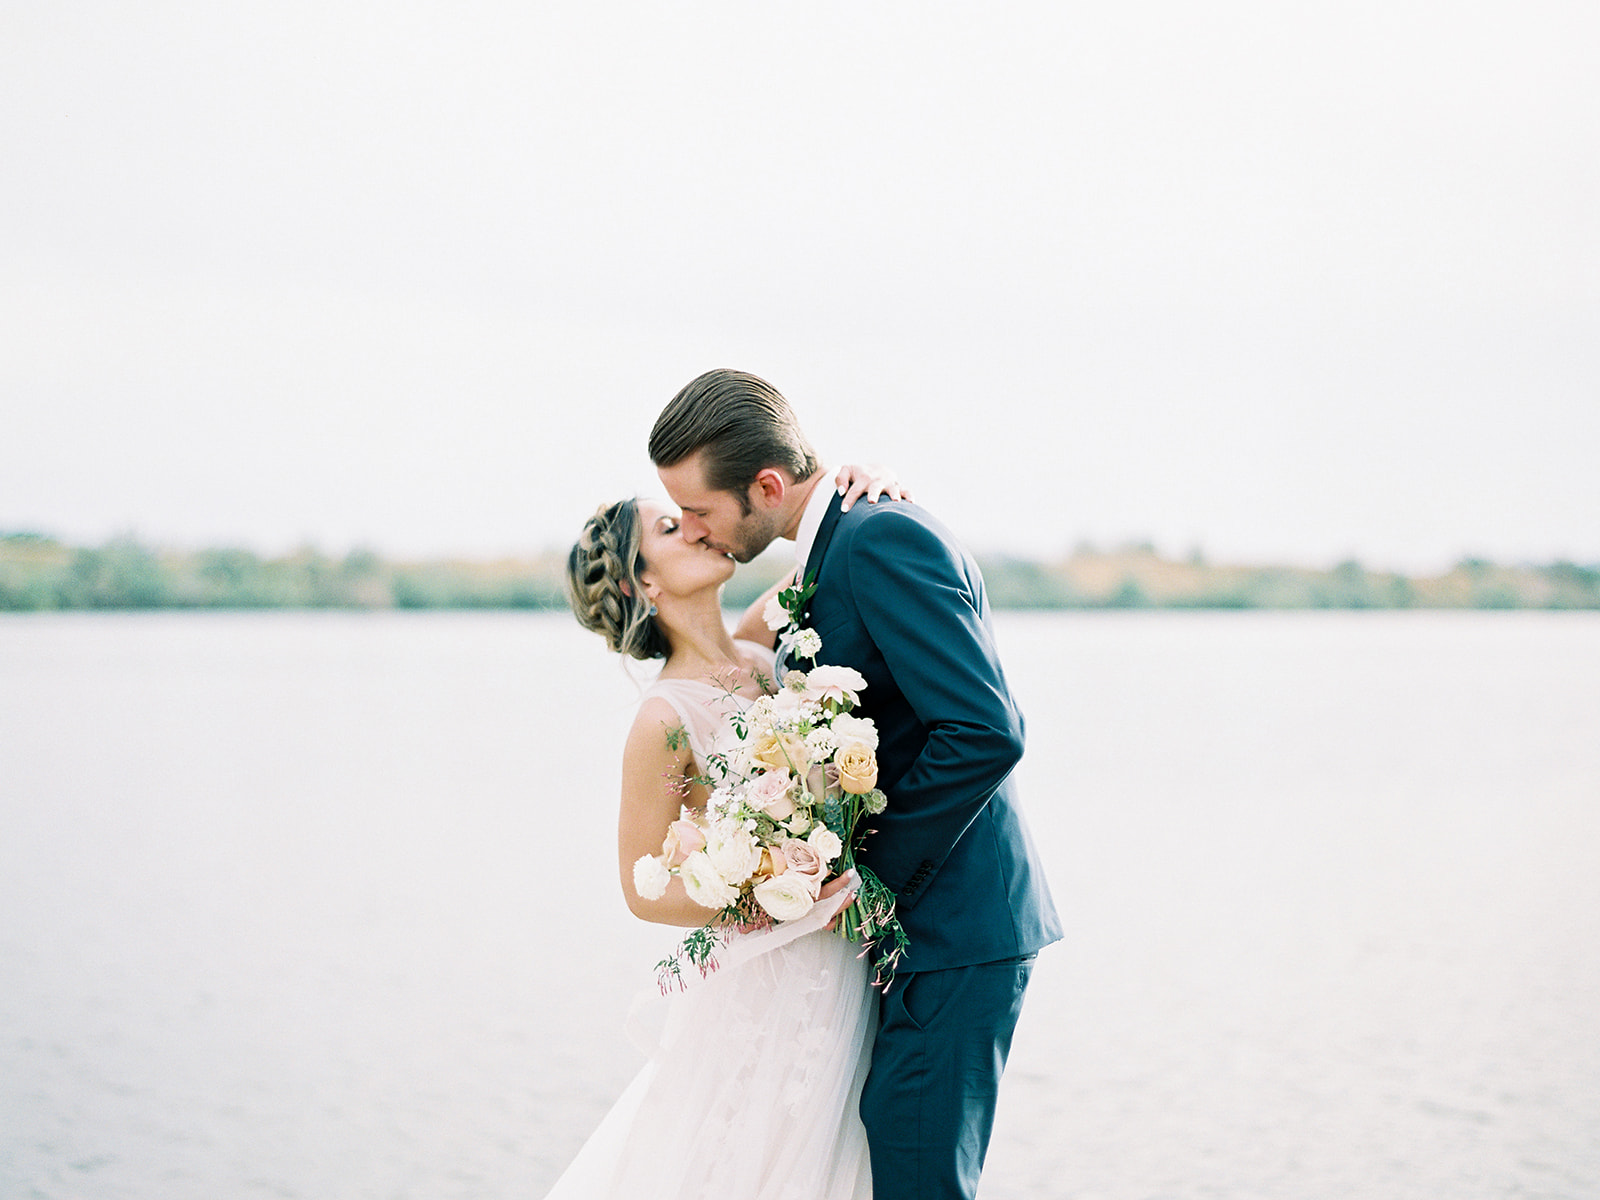 Bride and groom kissing with bride holding bouquet in front of lake.